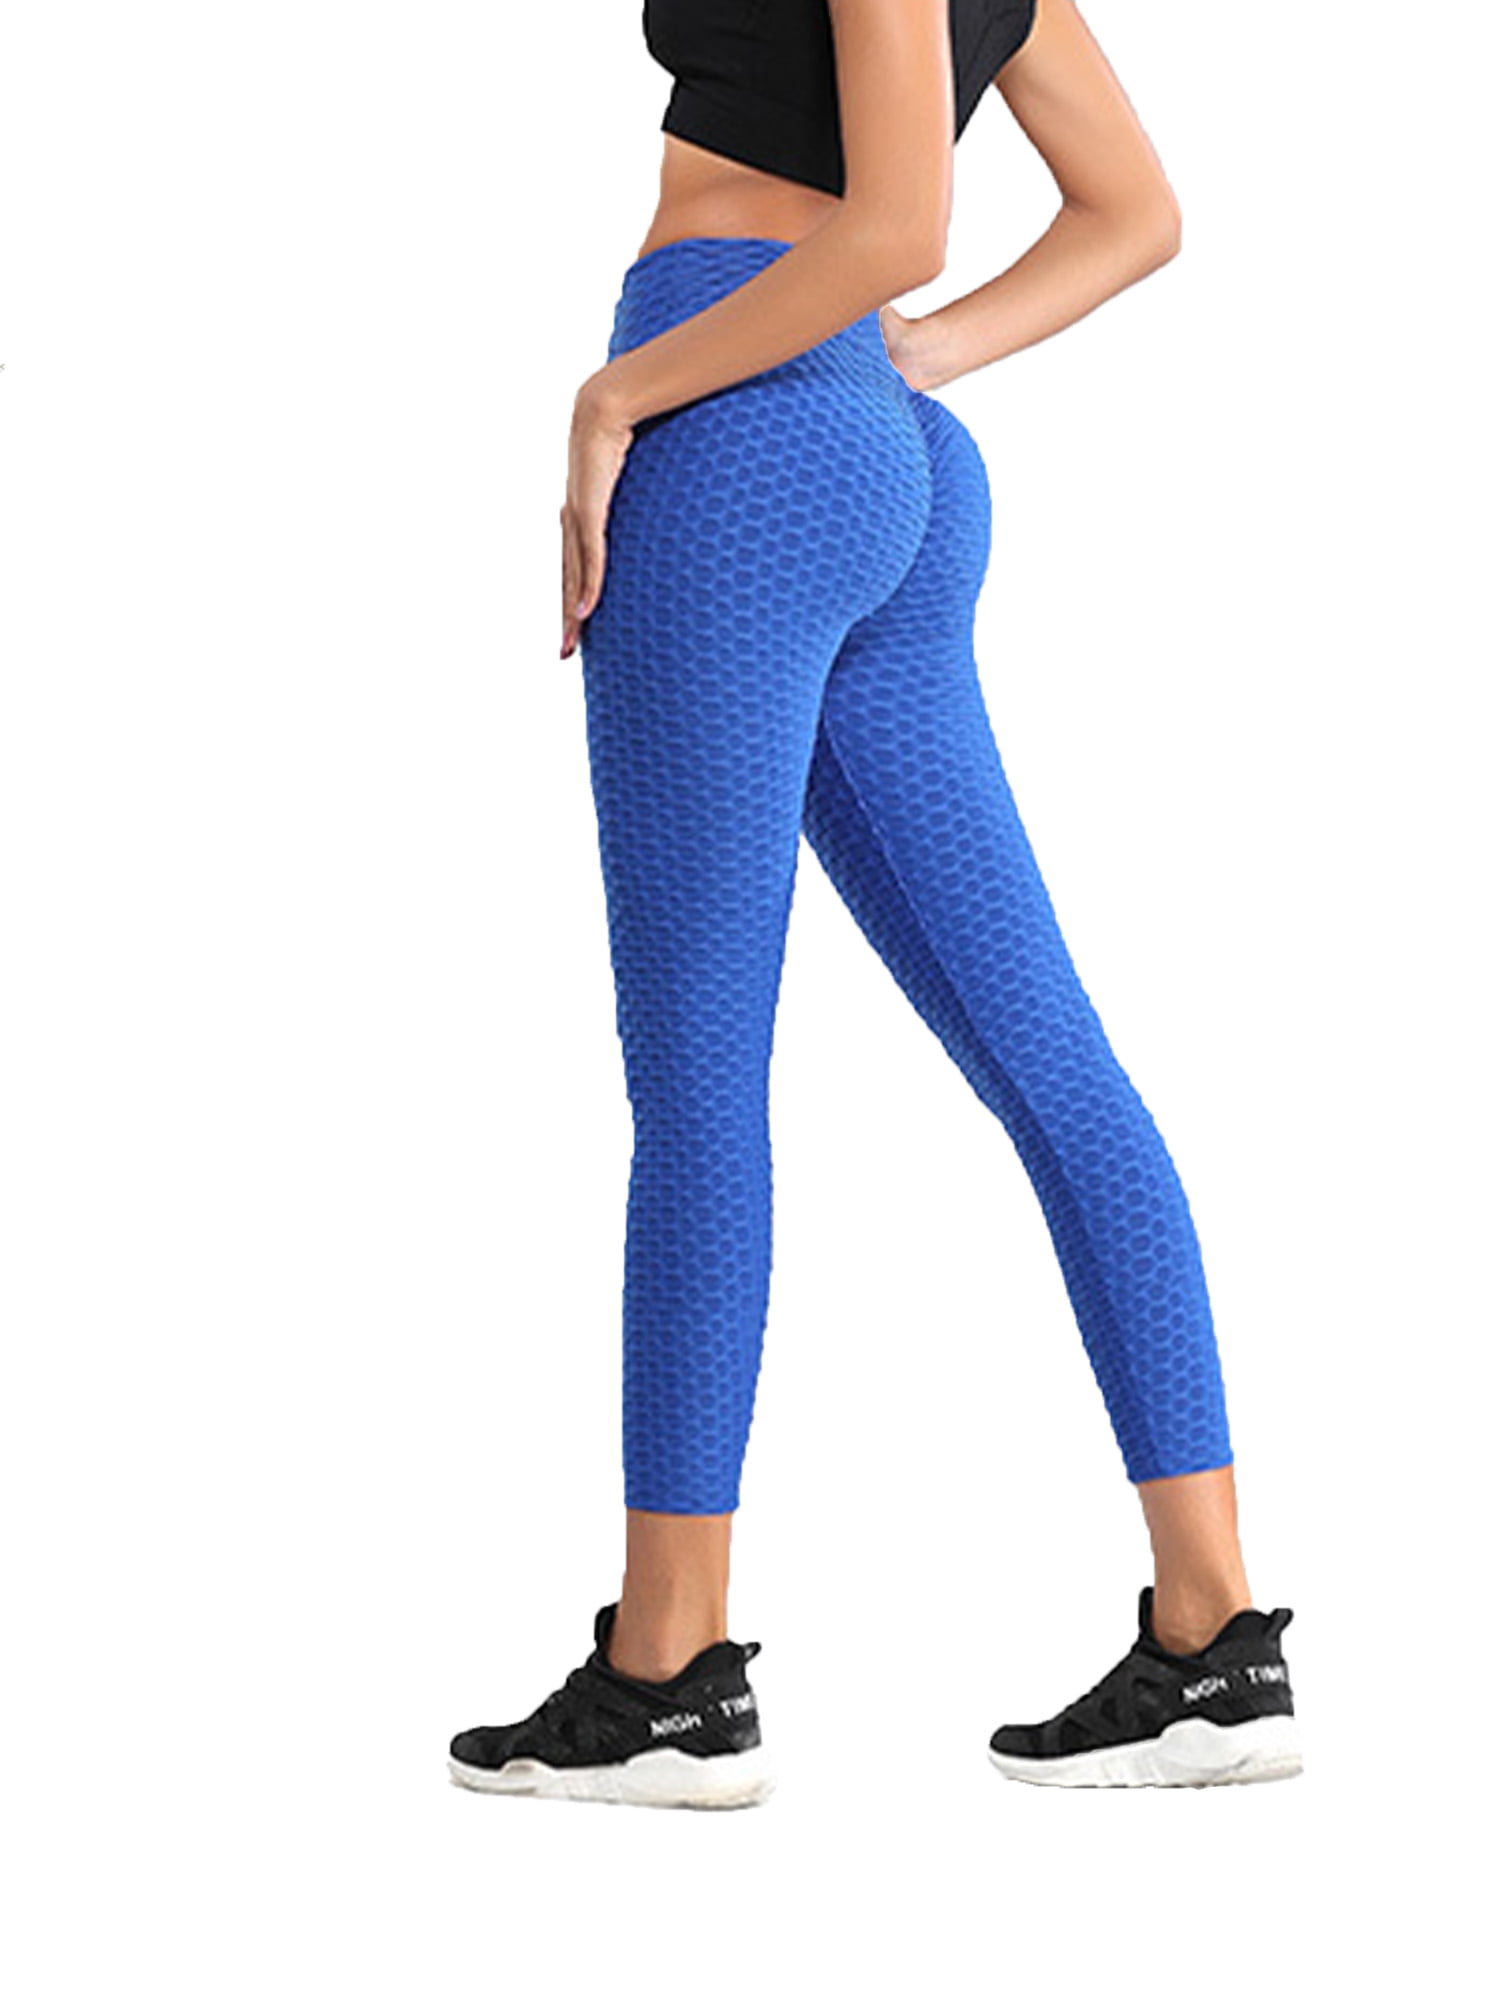 Women Push Up Yoga Pants High Waist Leggings Sports Fitness Gym Ruched Trousers